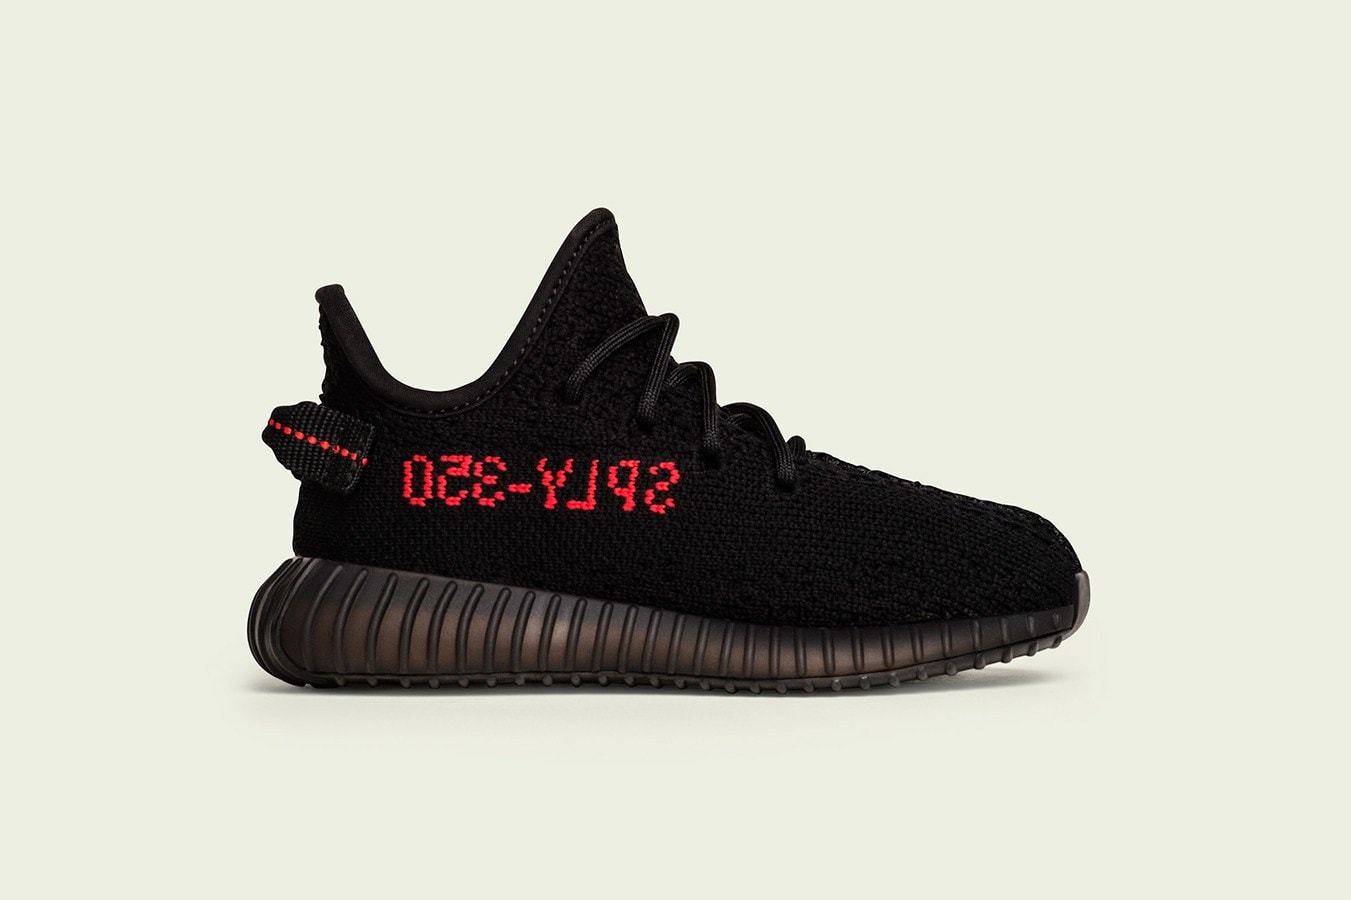 adidas Originals YEEZY BOOST 350 V2 "Black/Red" Official Release Date